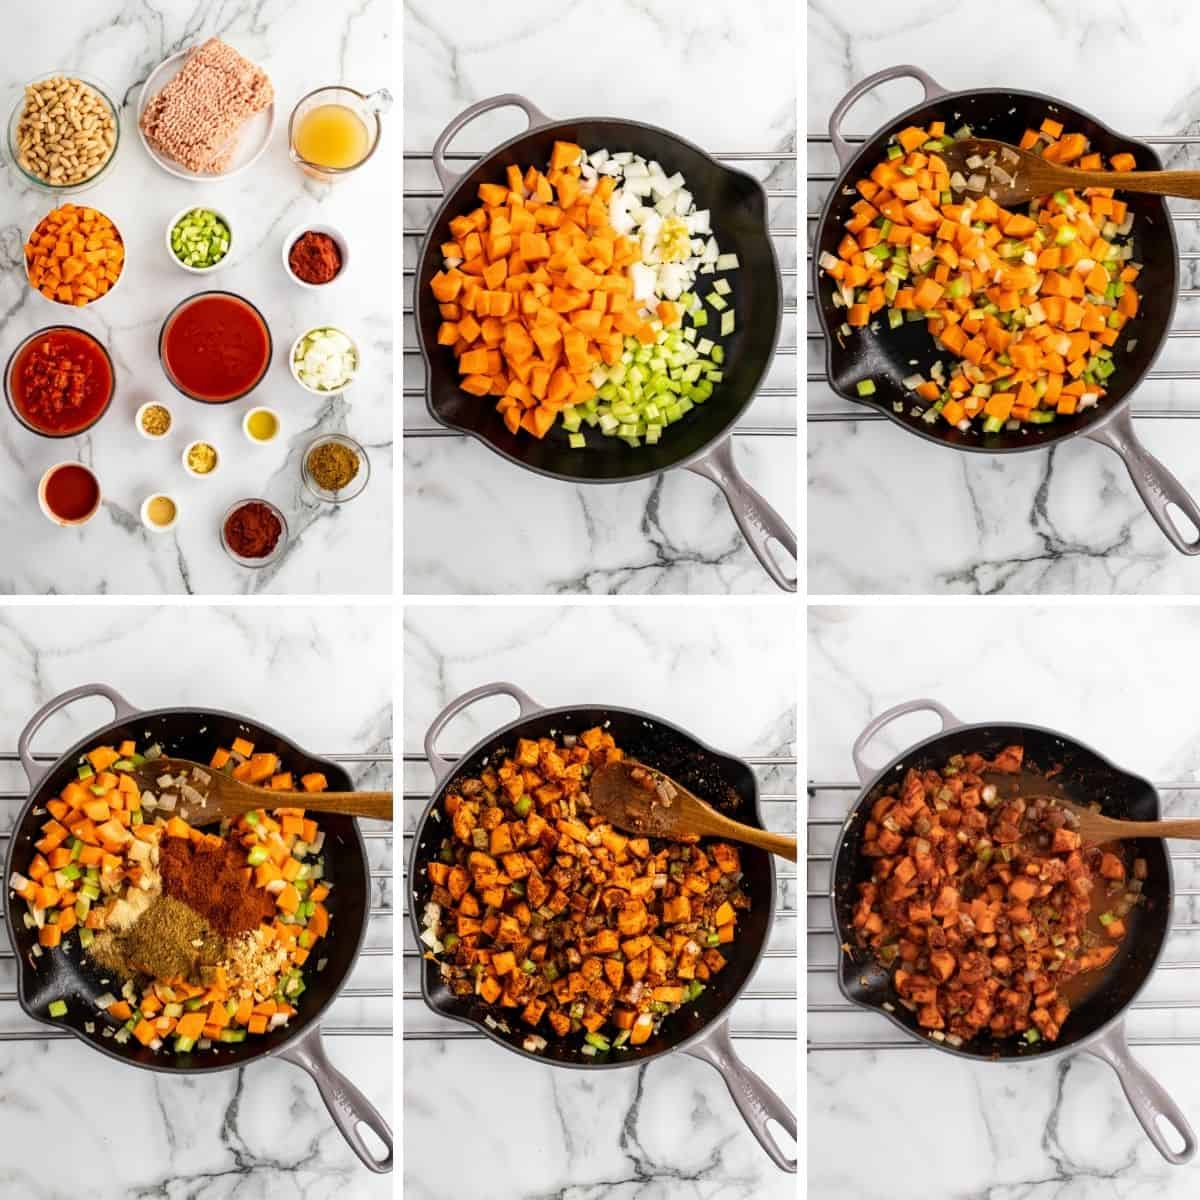 A step-by-step collage showing how to make Buffalo Chicken Chili